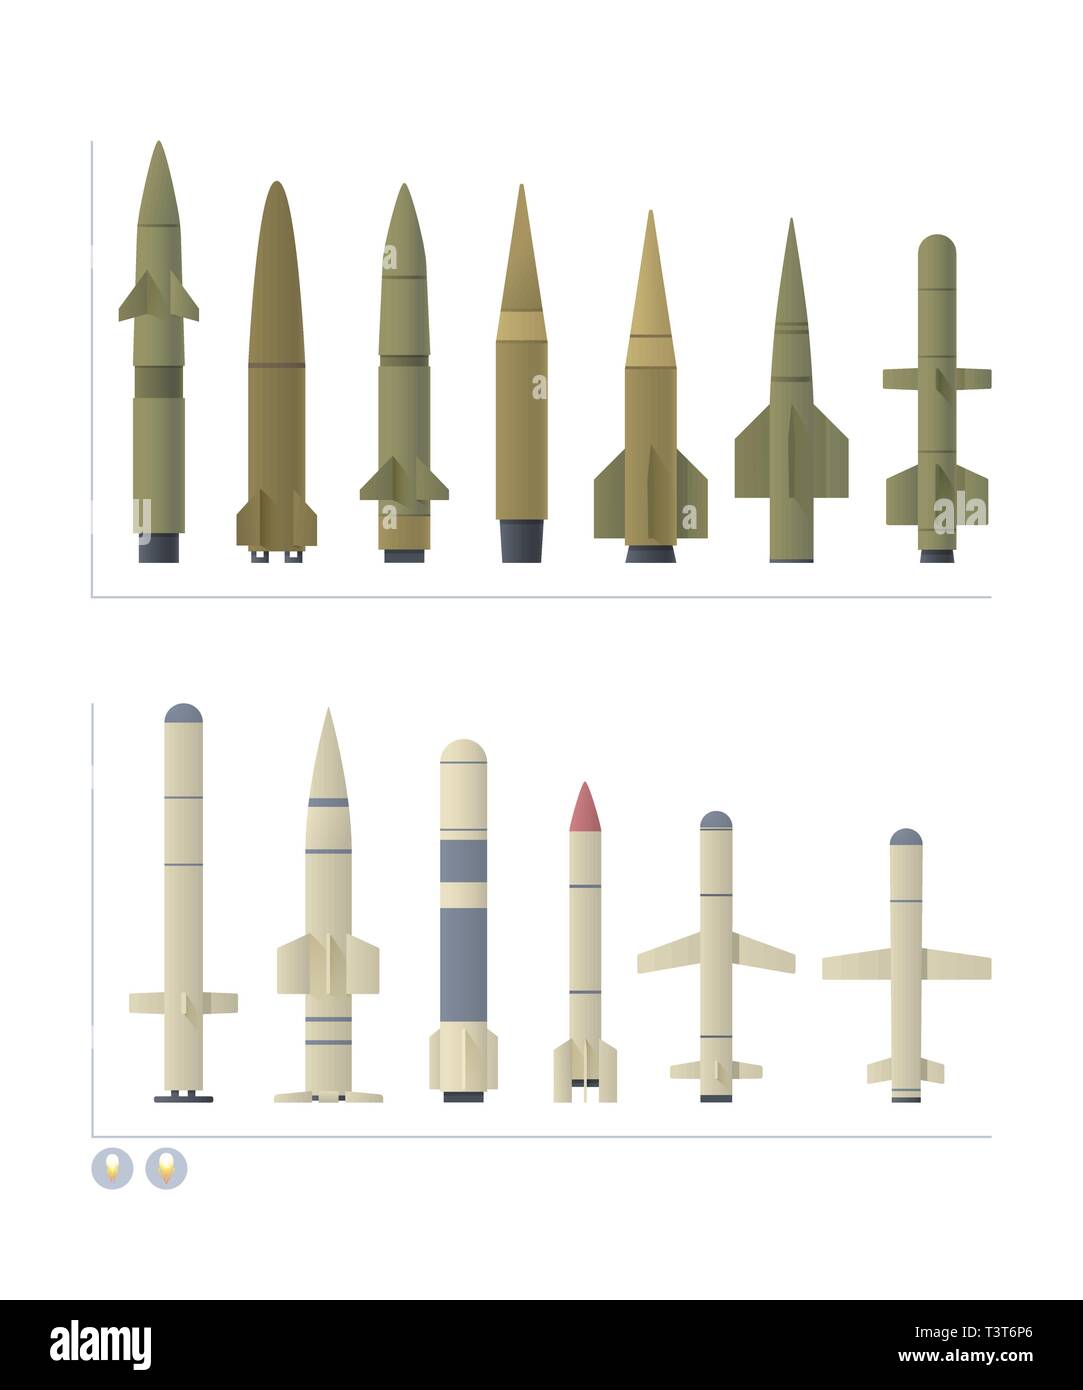 Set of military Missile is isolated on a white background. The set has different forms and colors of the cruise and ballistic missiles. Stock Vector